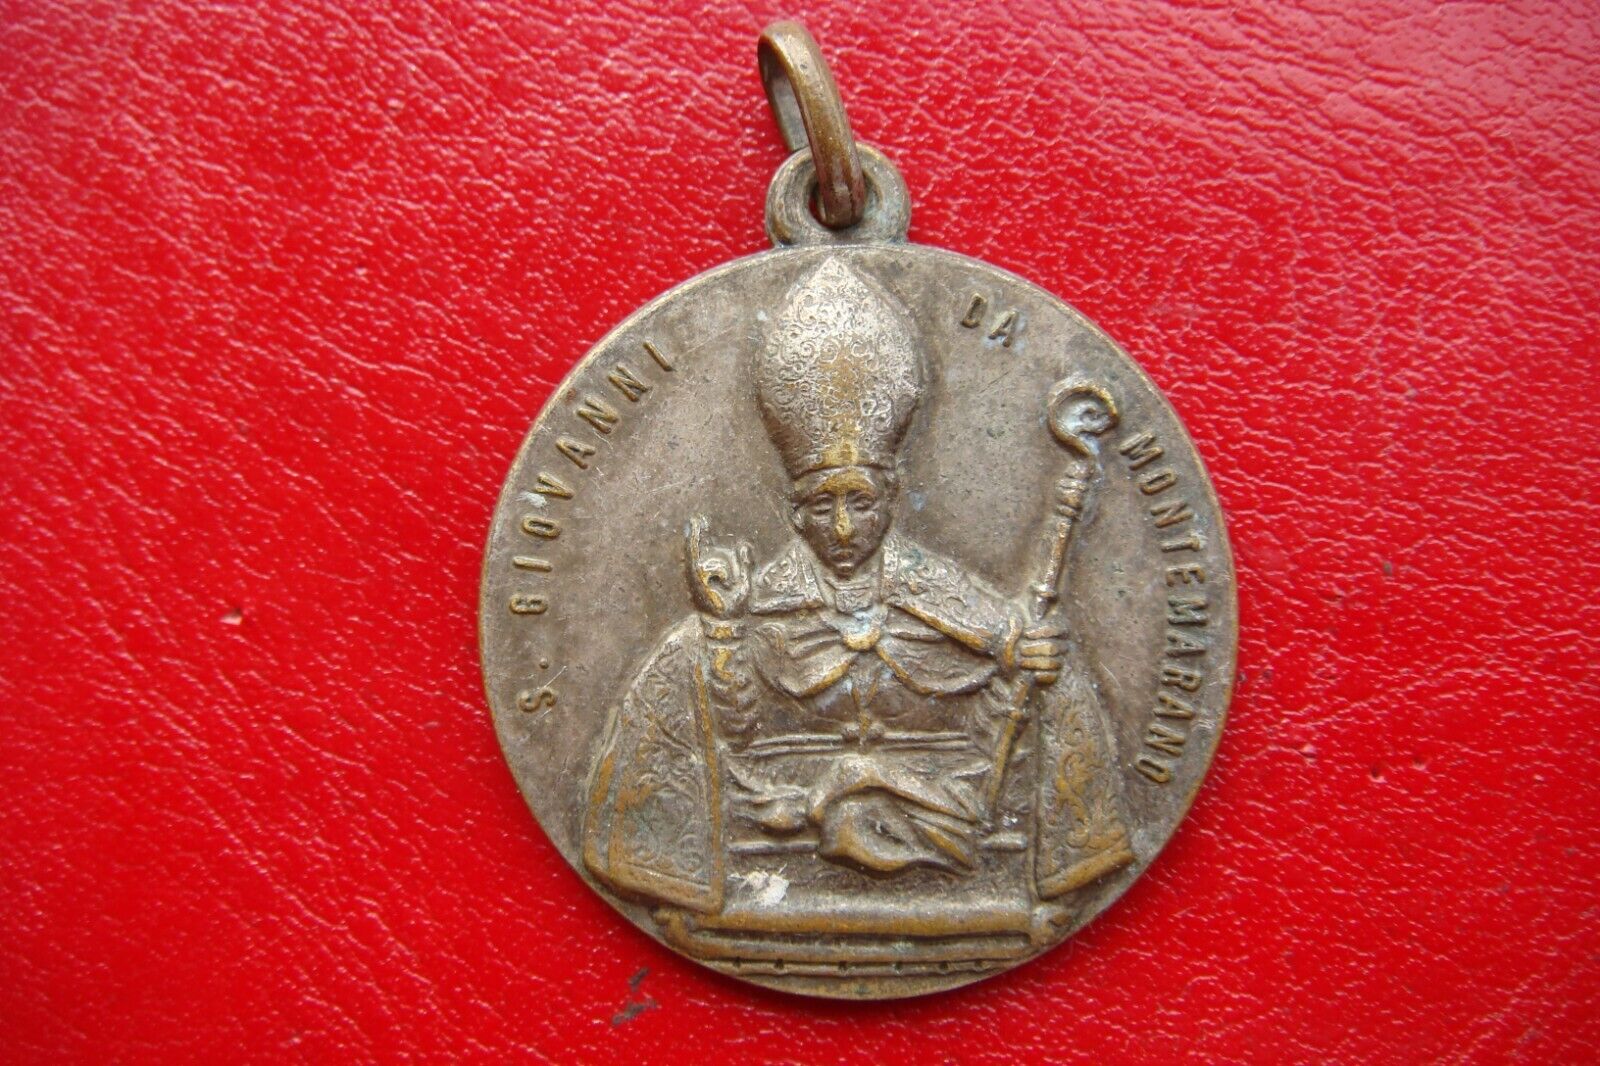 ANTIQUE VATICAN ITALY San Giovanni di Montemarano PROTECT OUR HOME MEDAL PENDANT